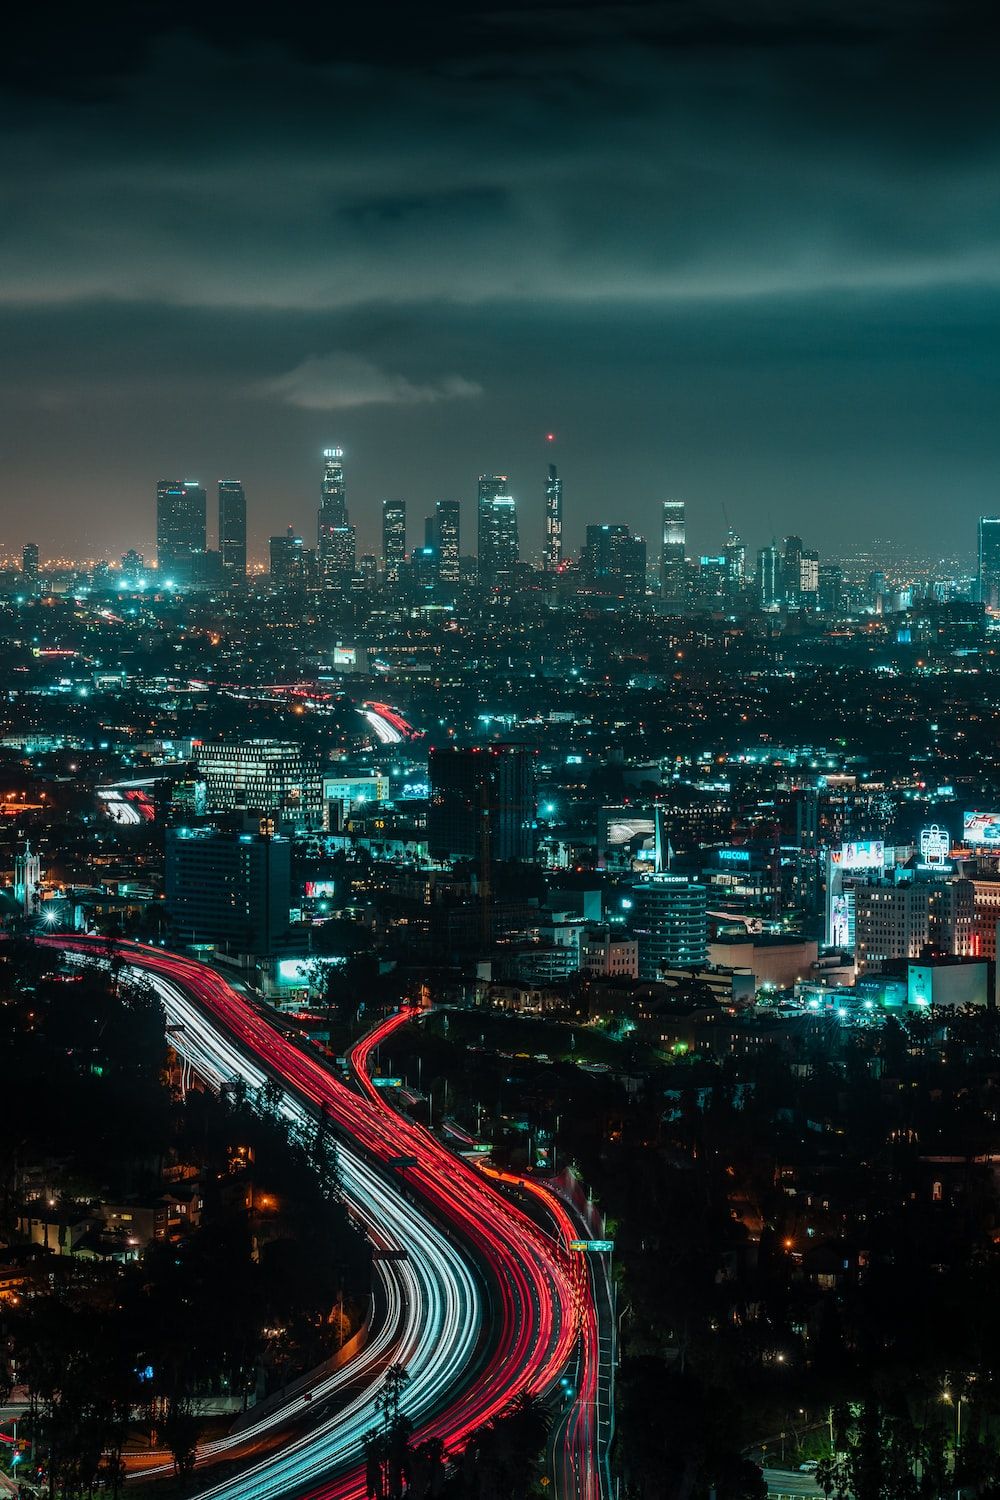 1K+ Los Angeles Night Picture. Download Free Image